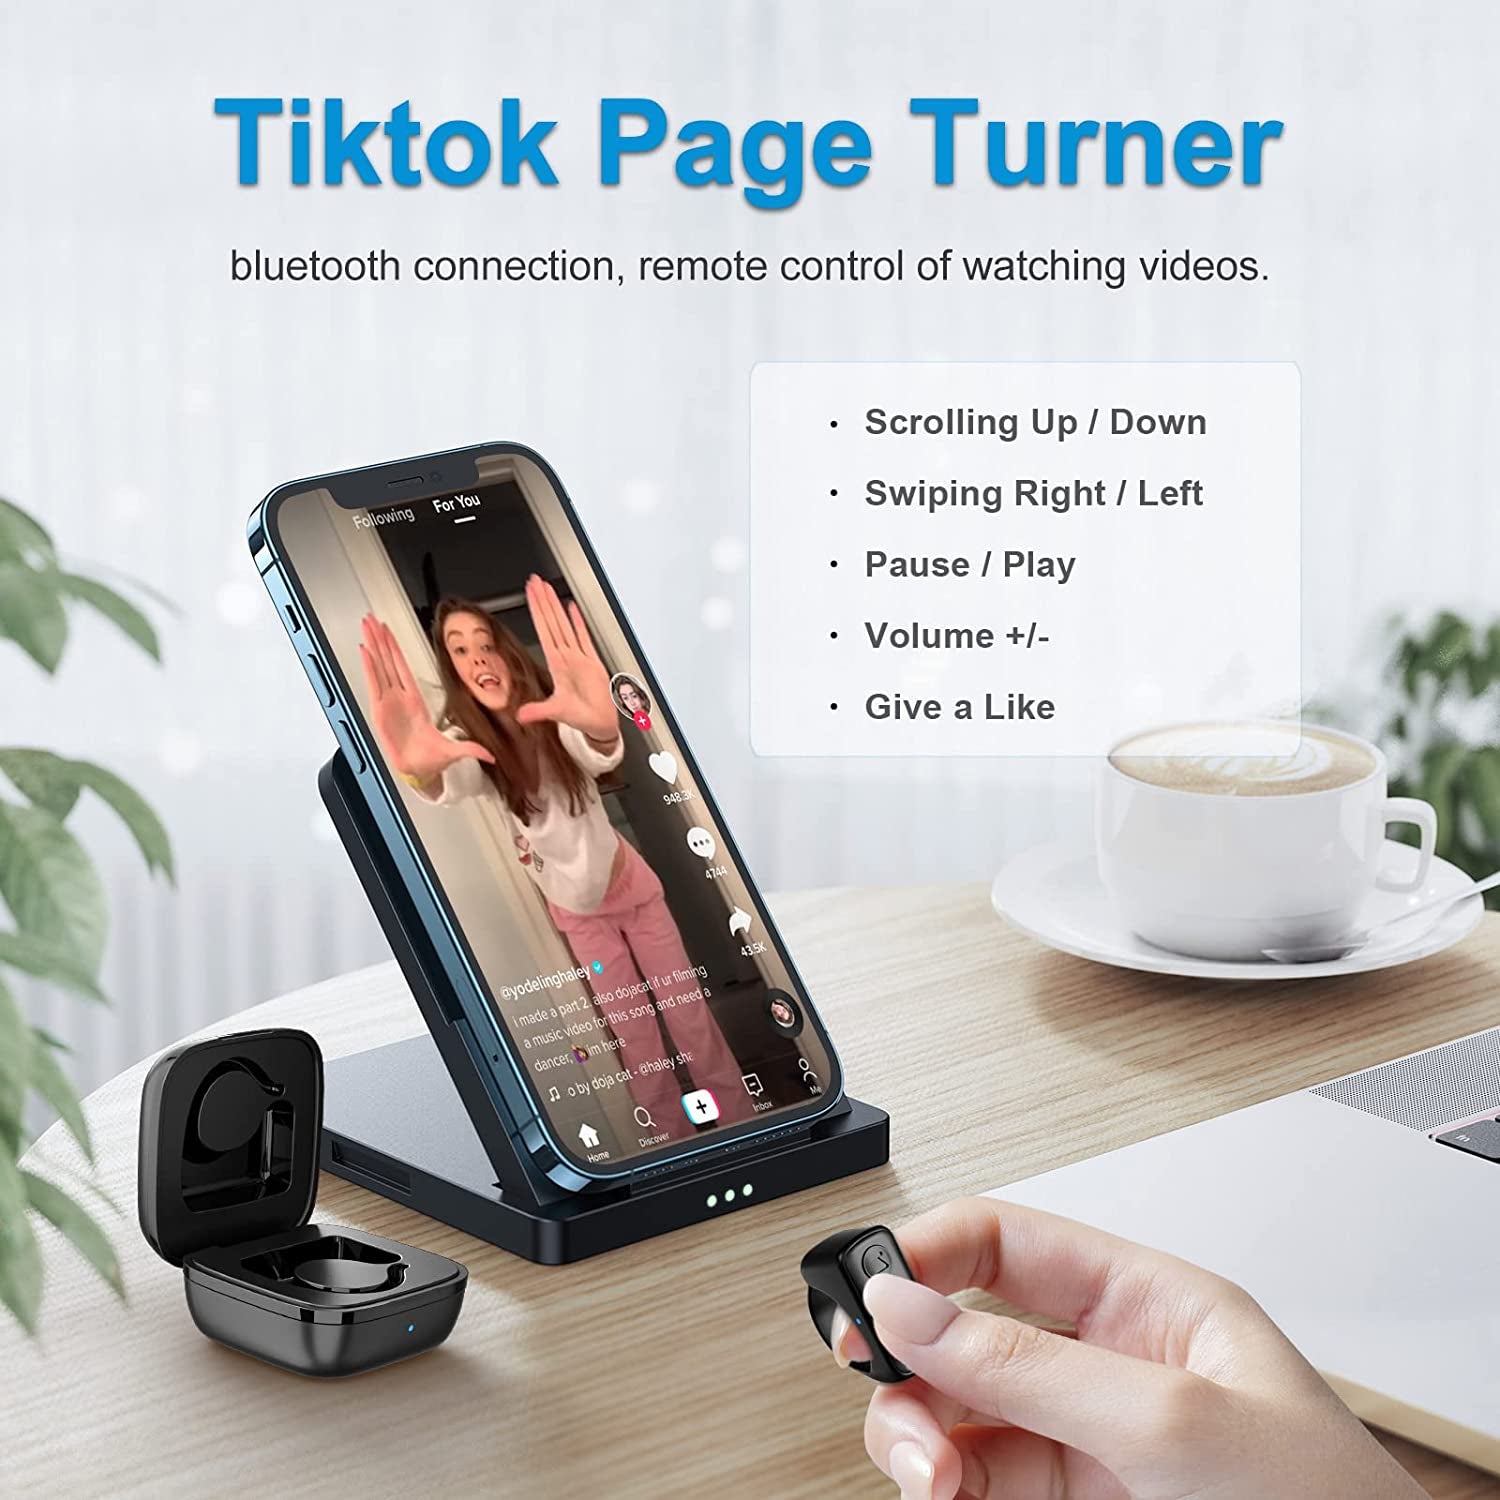 Tiktok Remote Control TIK Tok Scrolling Ring, Finger Remote for Tiktok Short Video Remote Controller, Bluetooth Remote for Android Iphone Ipad, Kindle APP Page Turner - Not for Kindle Devices (Black)